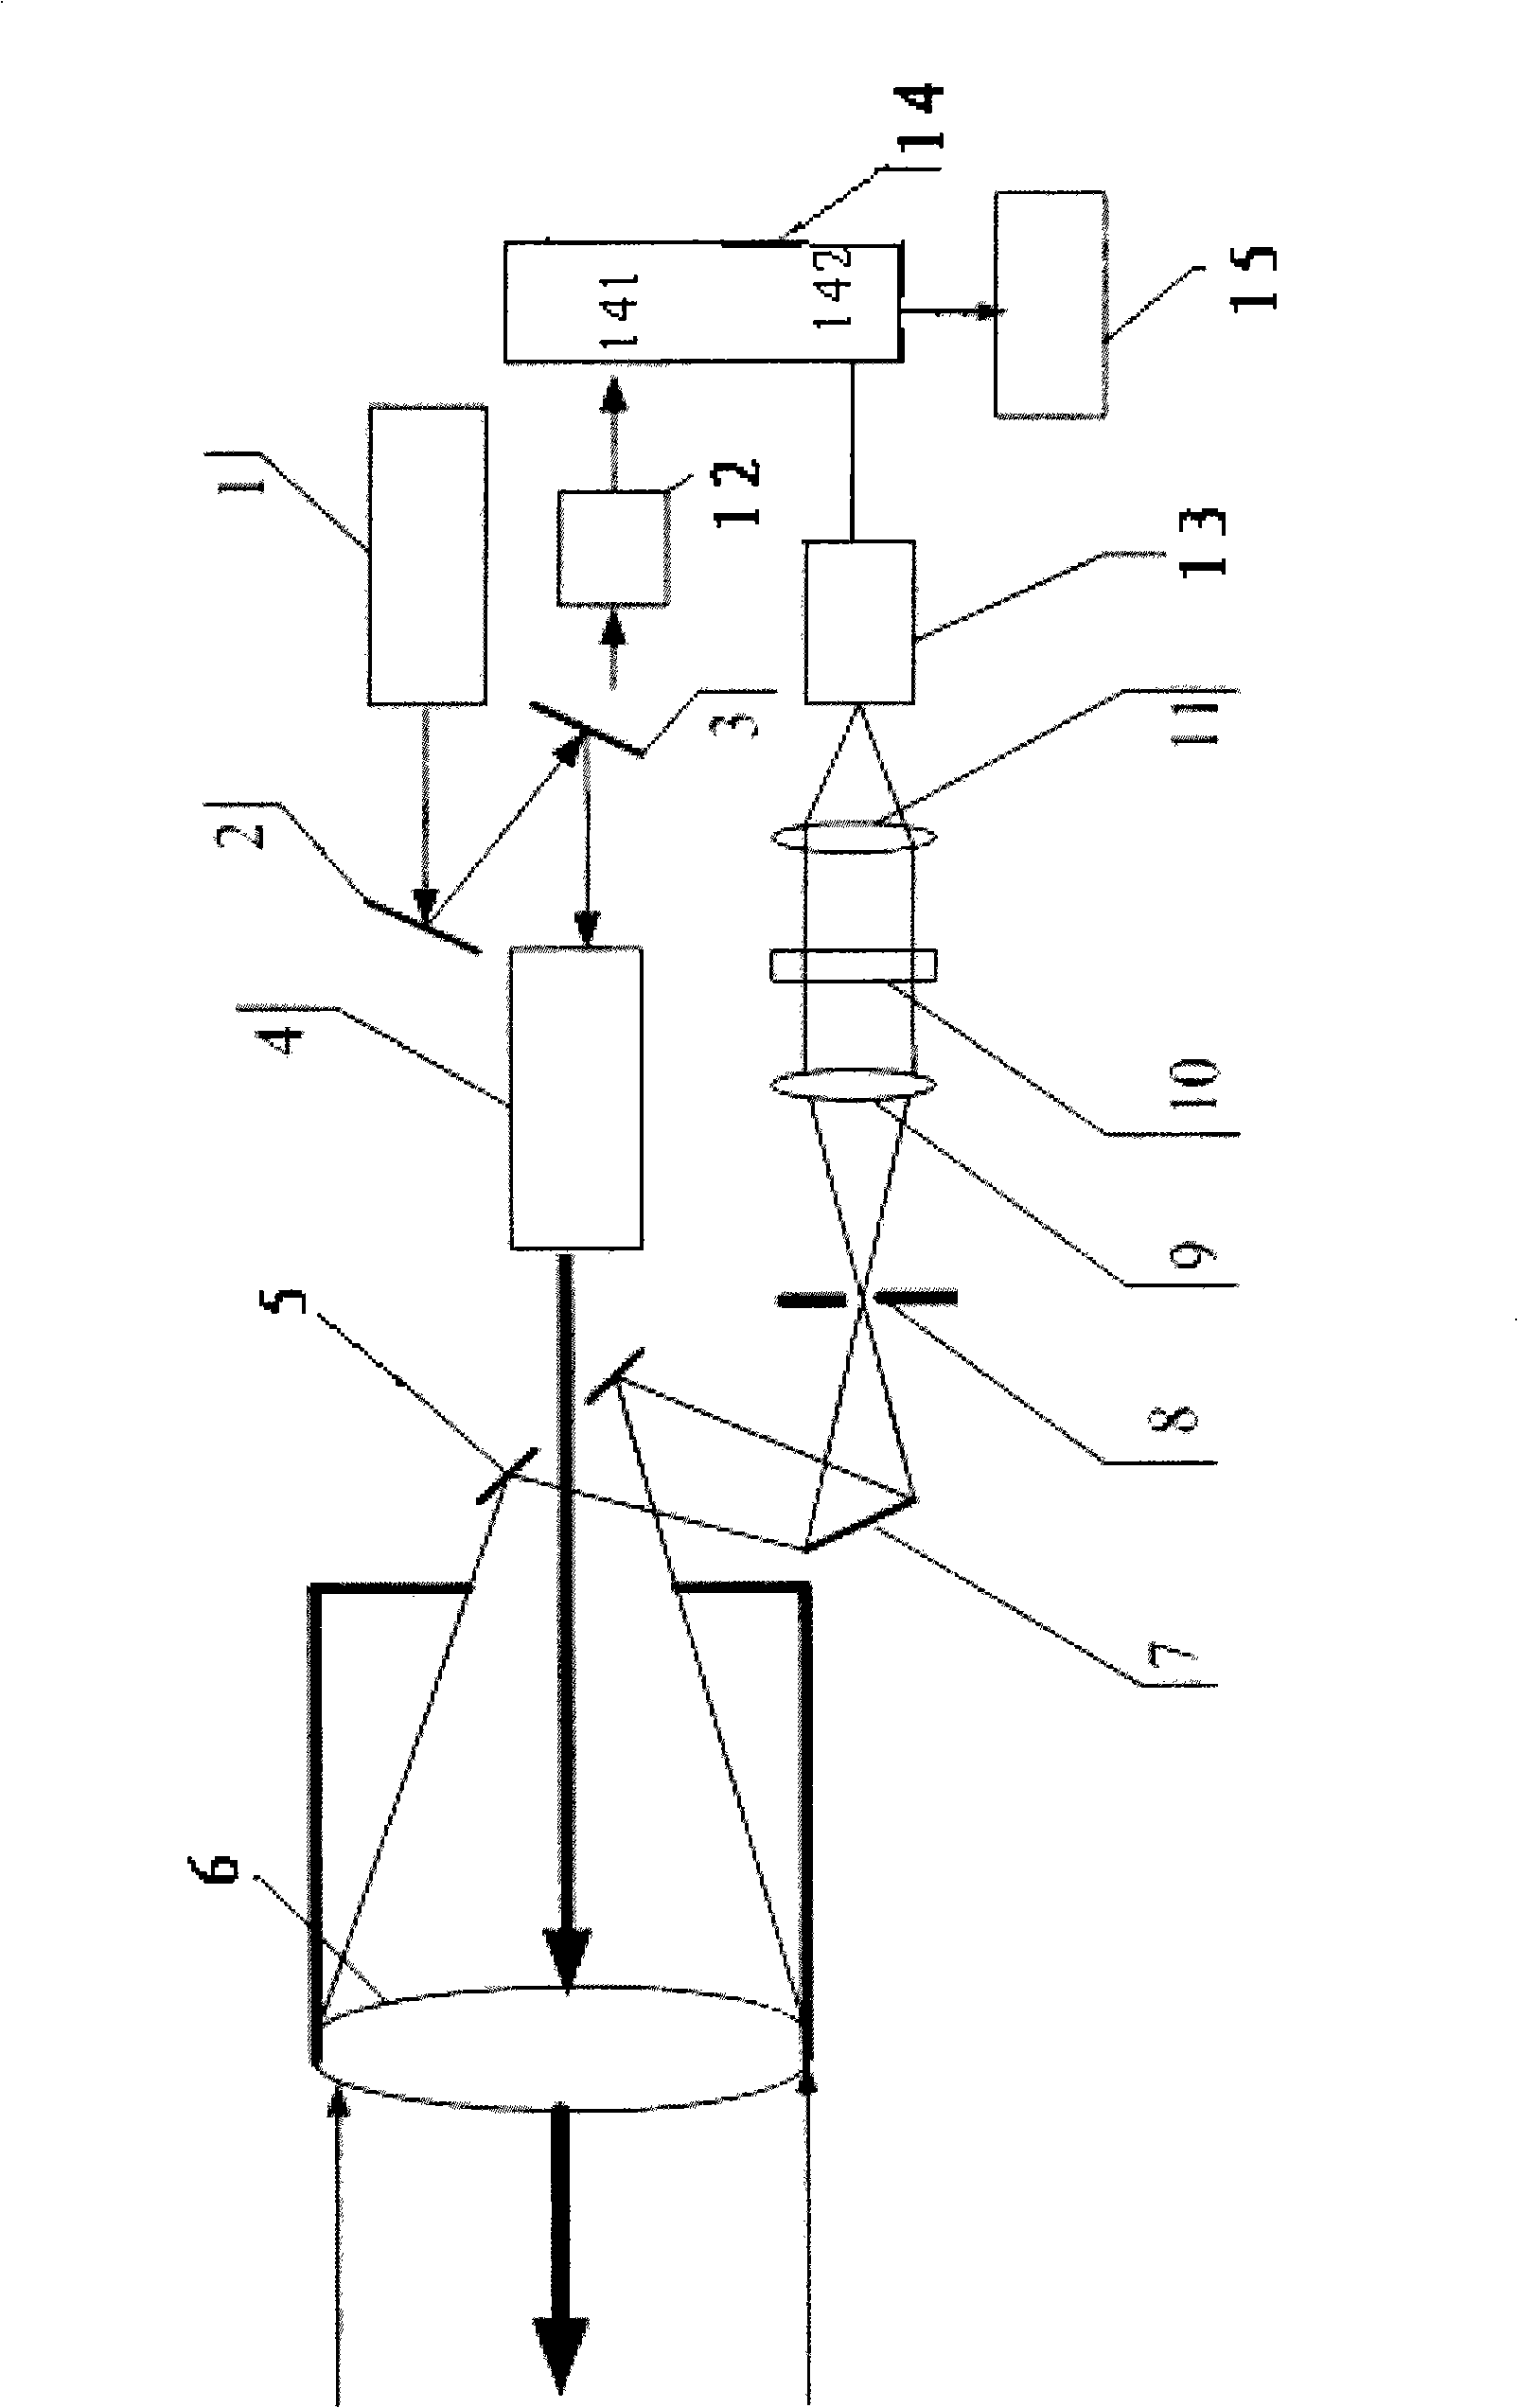 Laser radar transmission type coaxial transmitting and receiving equipment